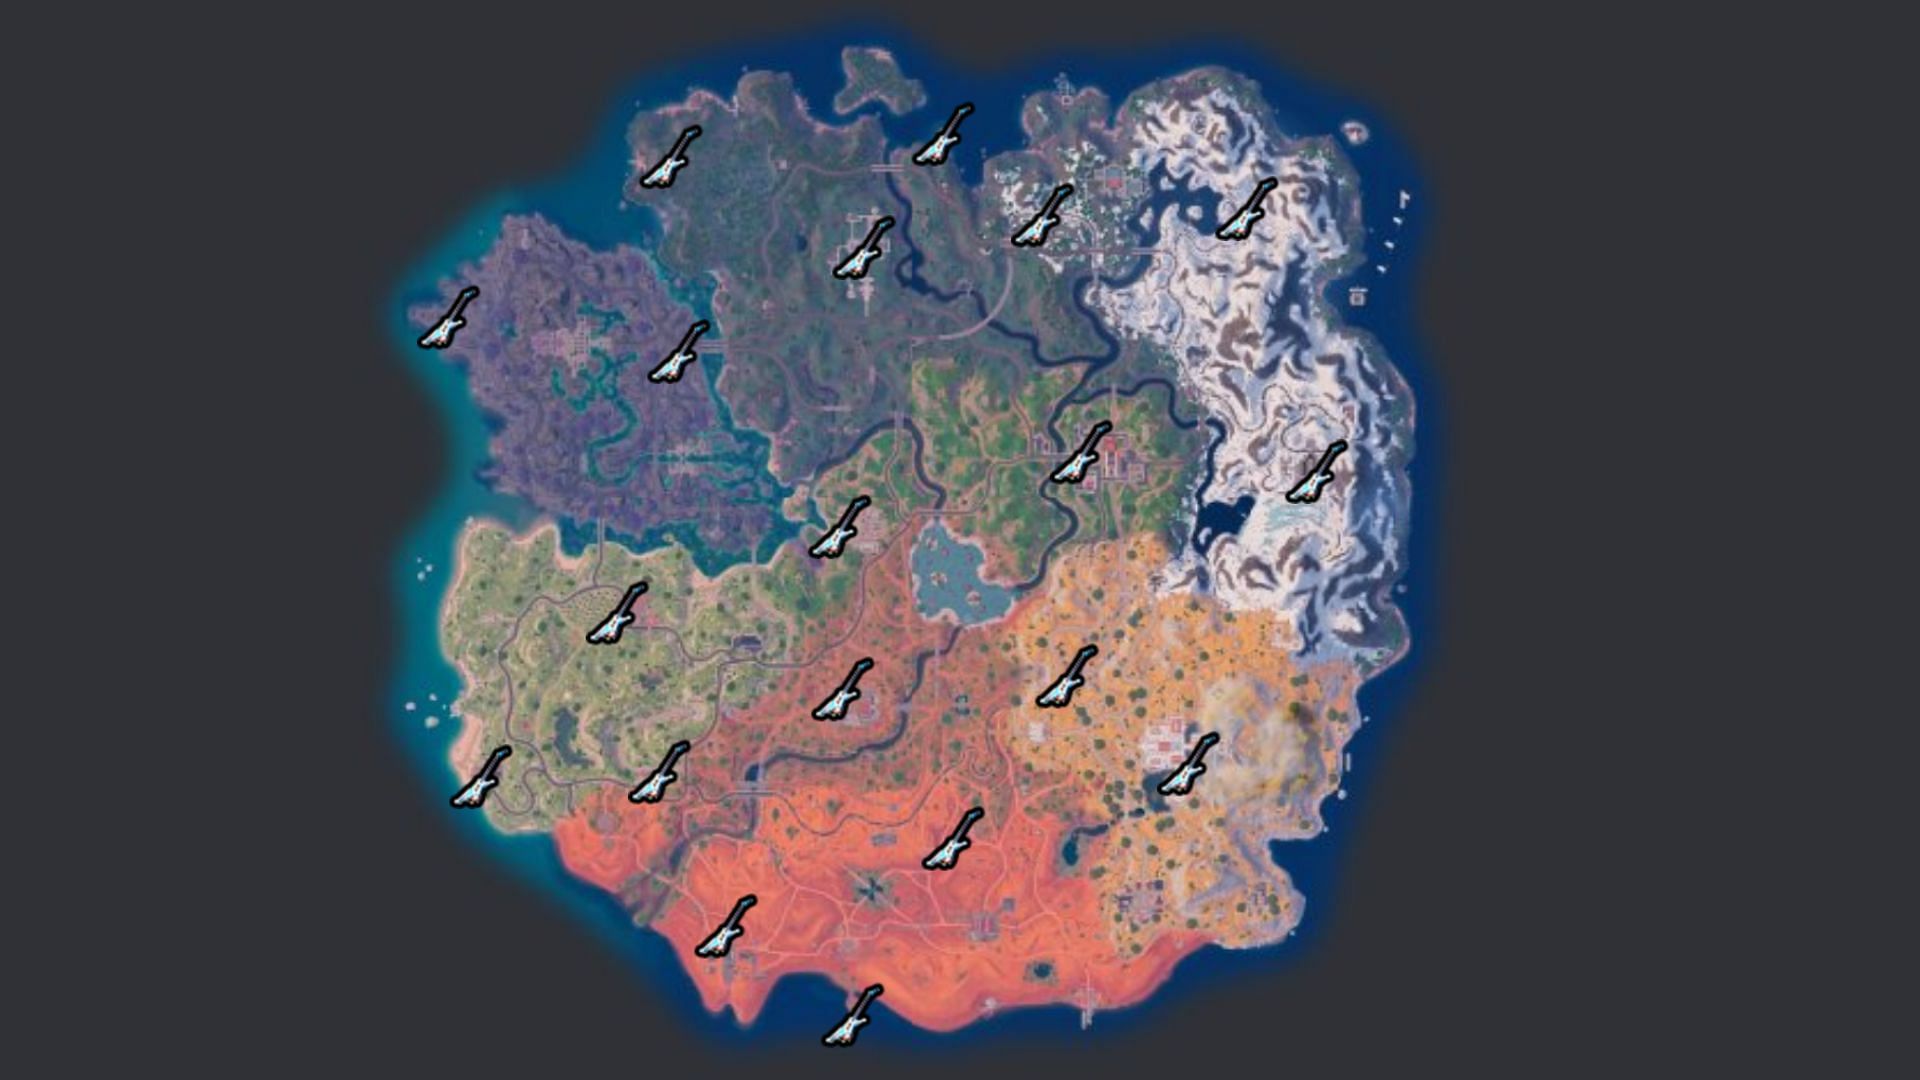 All Ride the Lightning Mythic spawns in Chapter 5 Season 3. (Image via Epic Games)